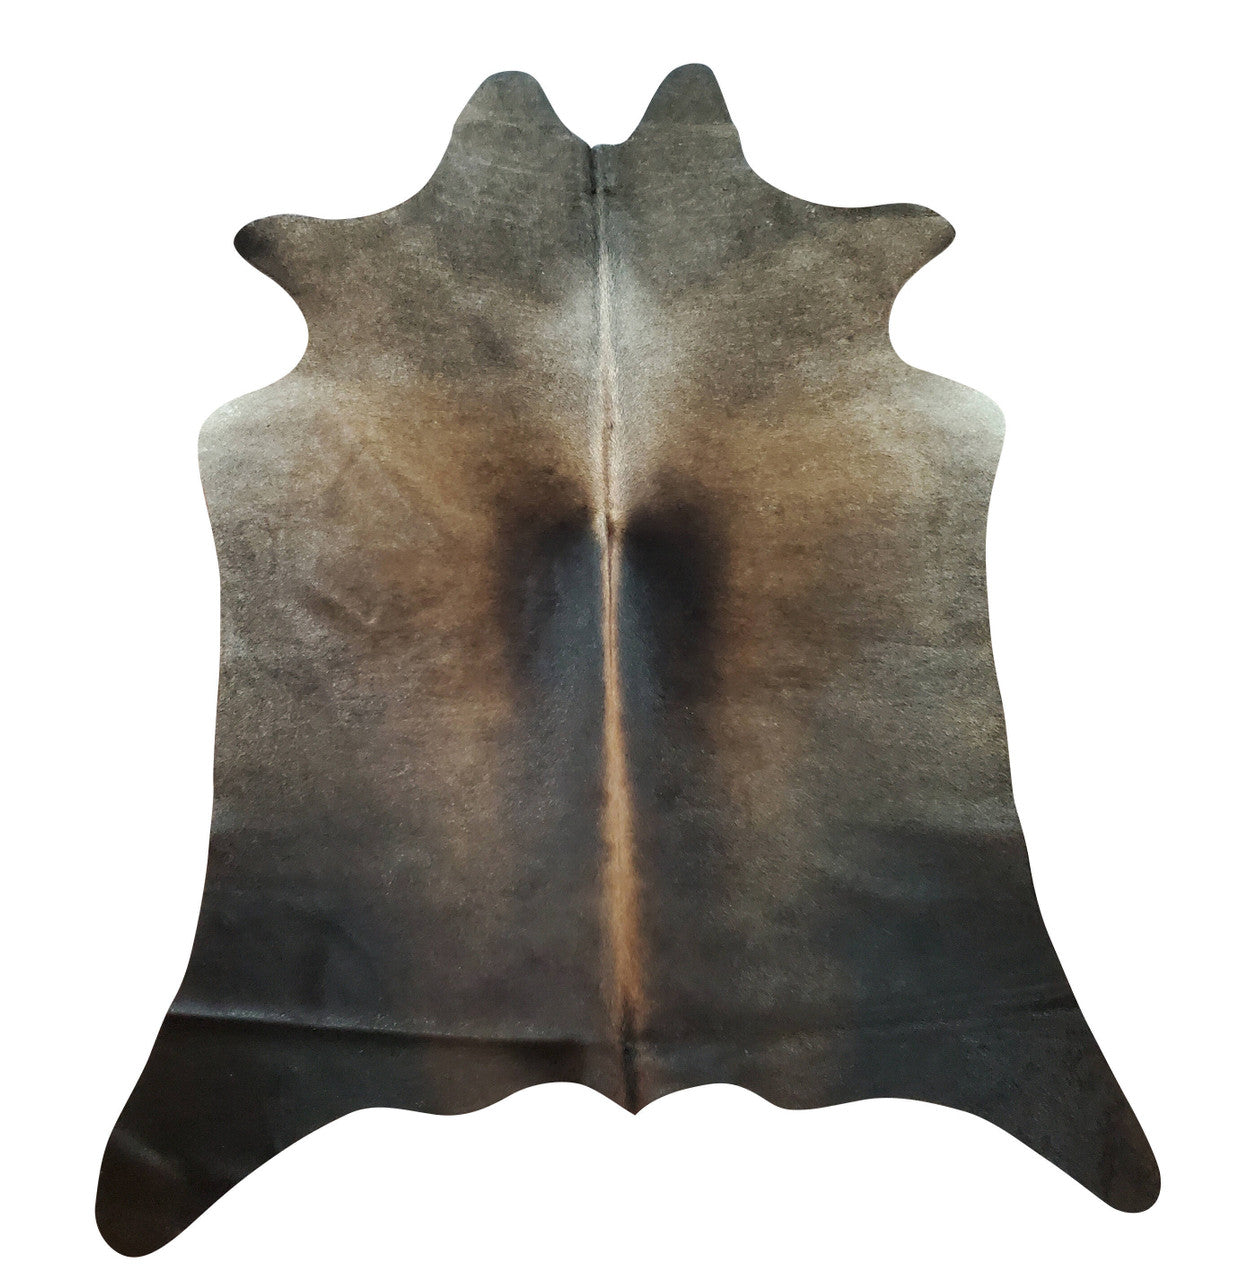 There are many benefits to using natural cowhide rugs in your home. For one, they are extremely durable and will last for many years.